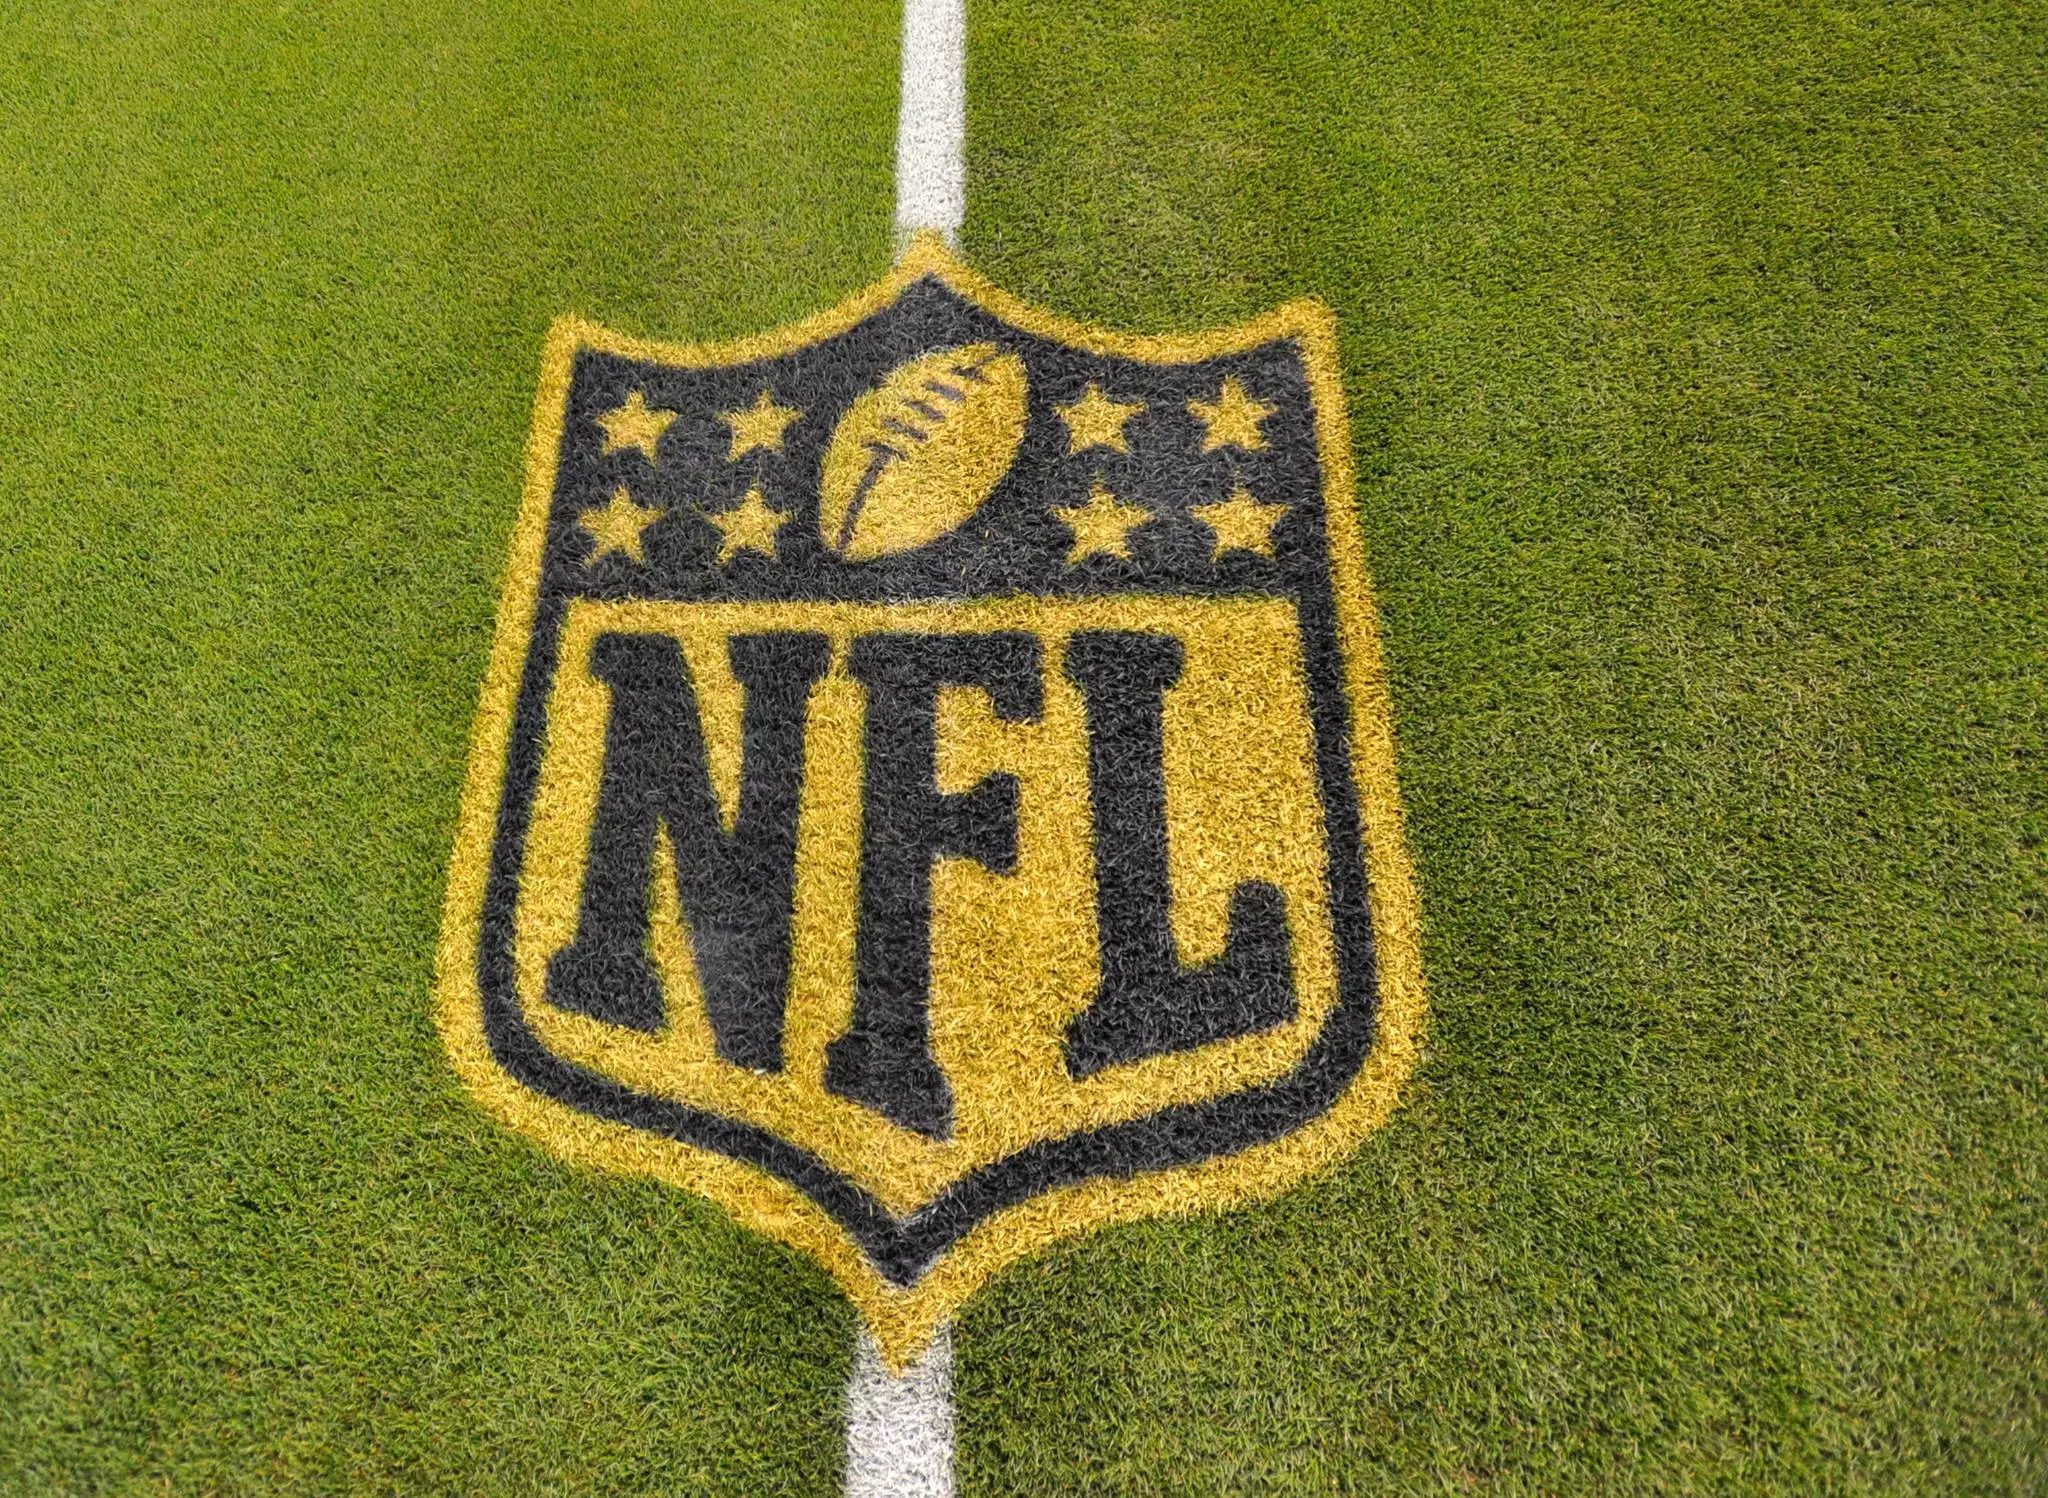 Four Charged For NFL Gambling Ring That Took $1 Billion In Bets